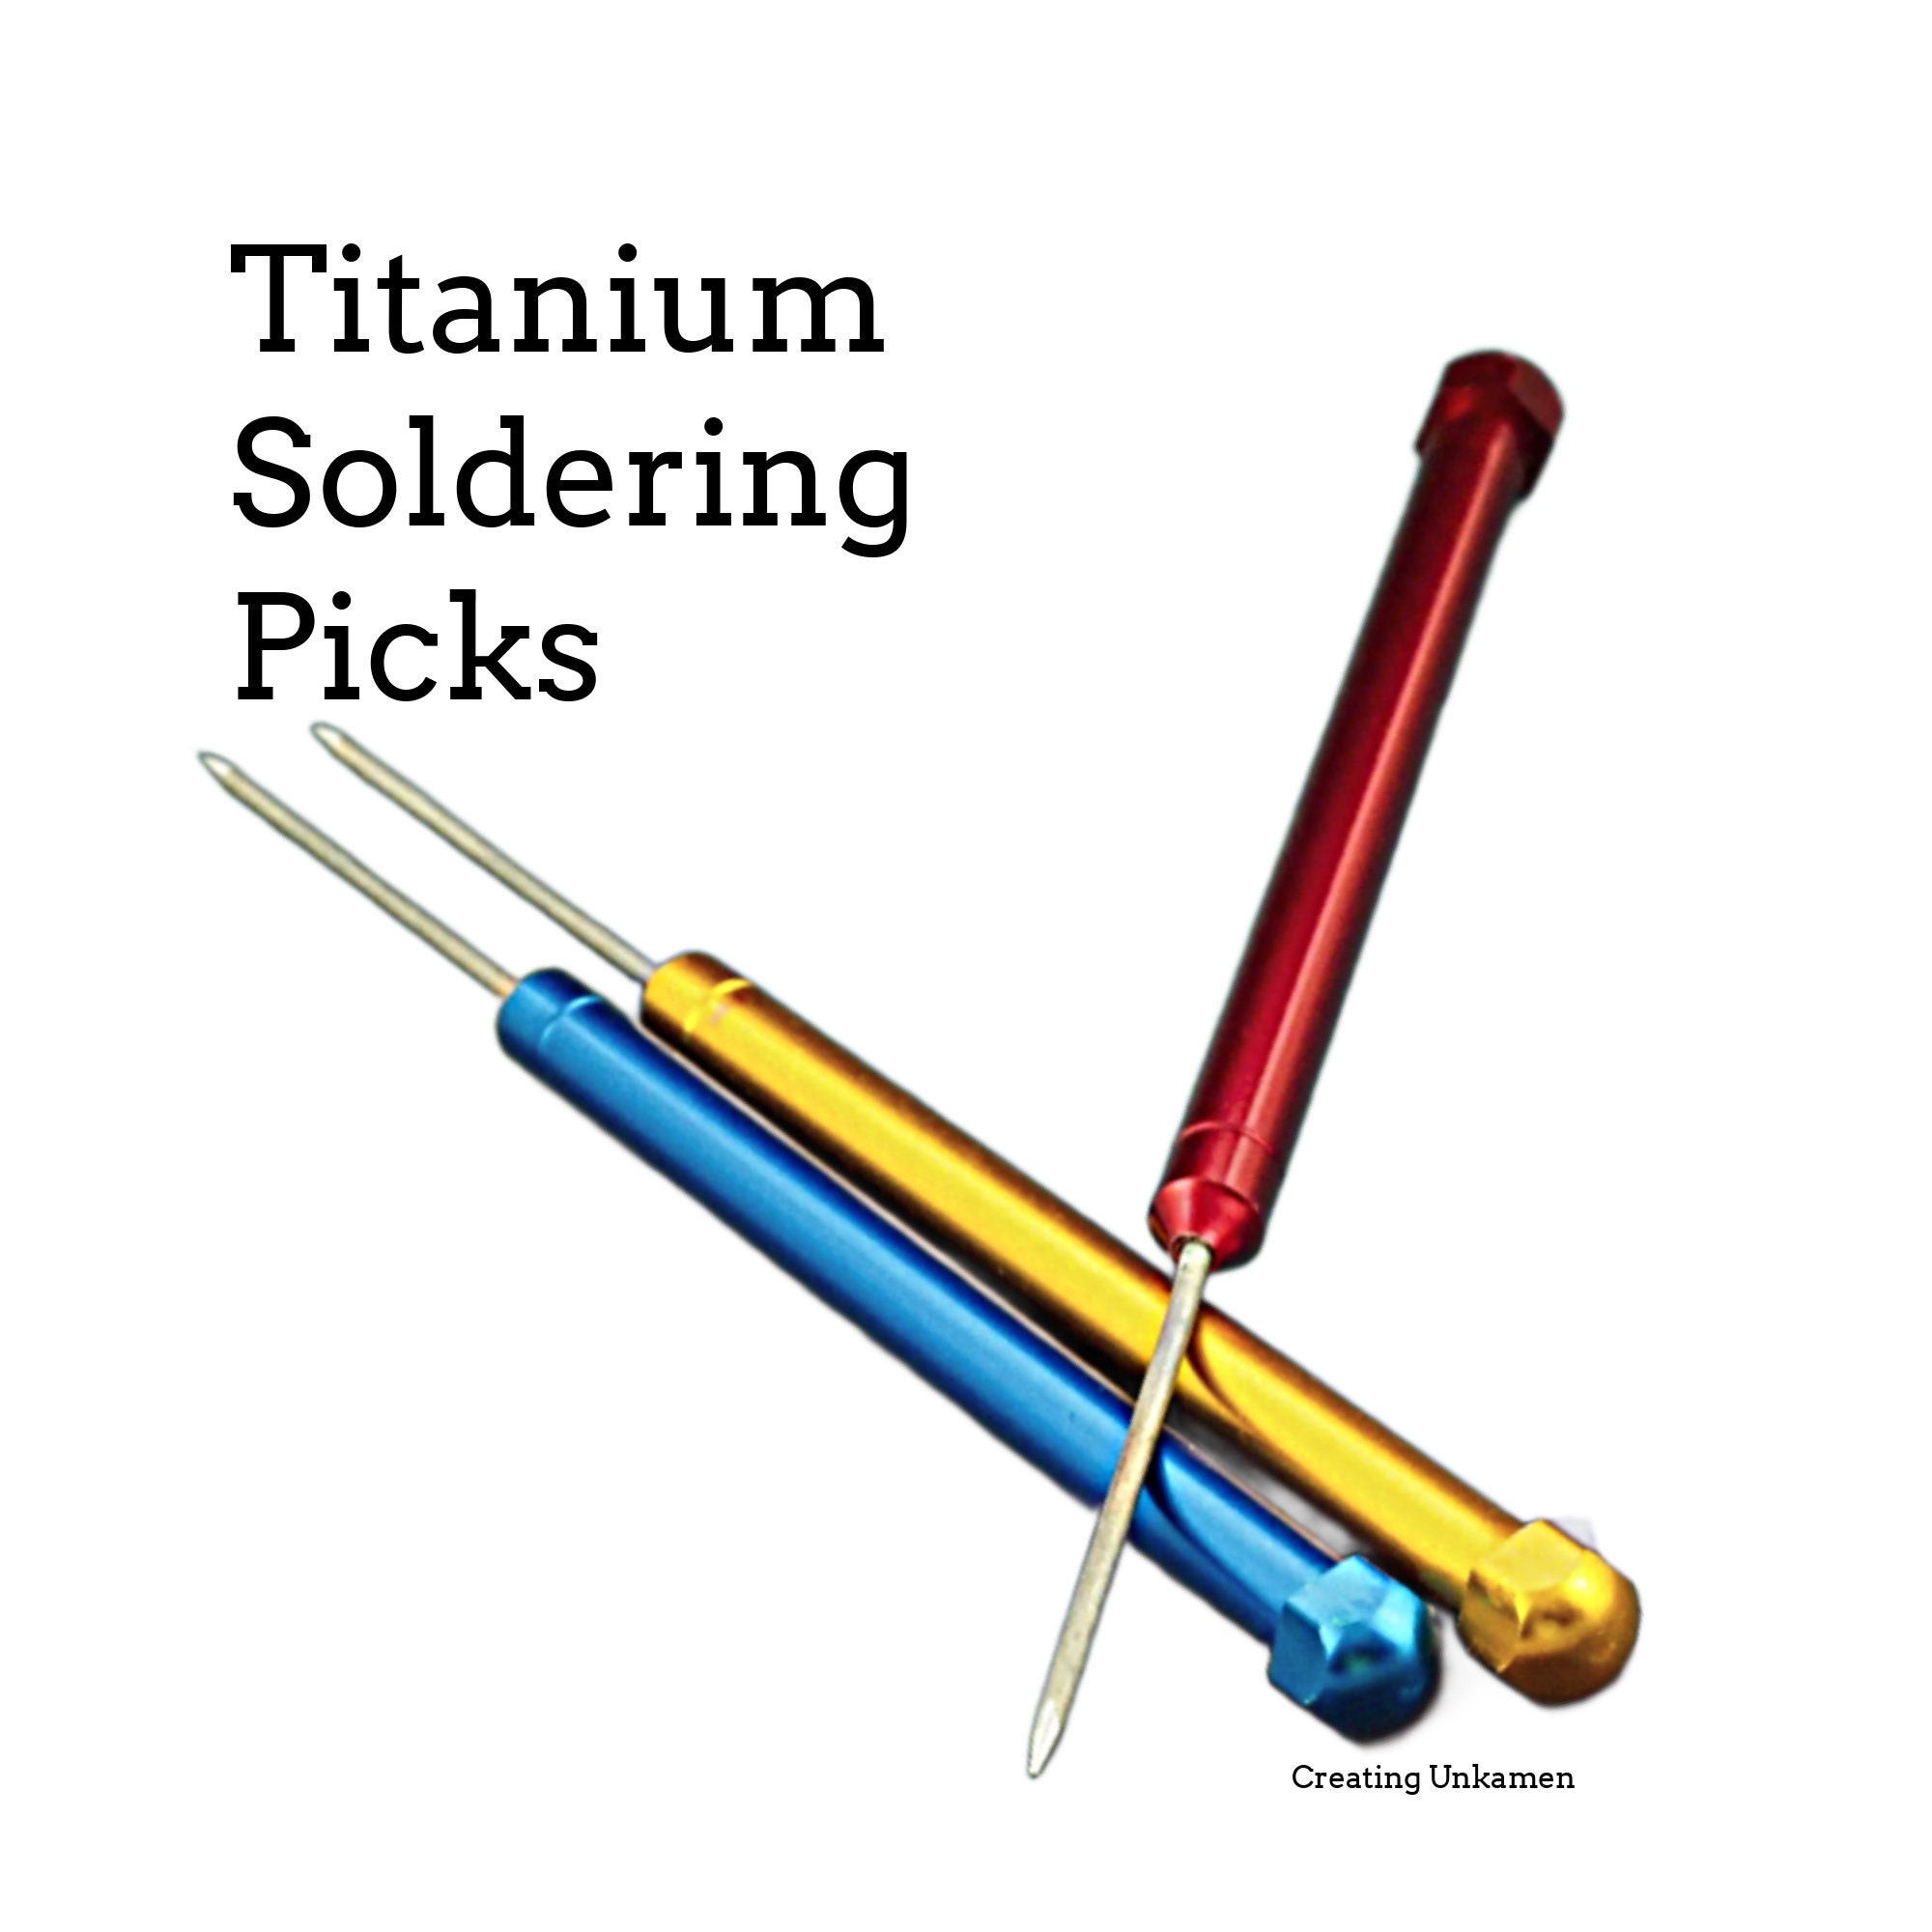 8 Piece Soldering Tripod Kit With Torch, Soldering Picks Titanium Alcohol  lamp And 2 Pair Of Tweezers